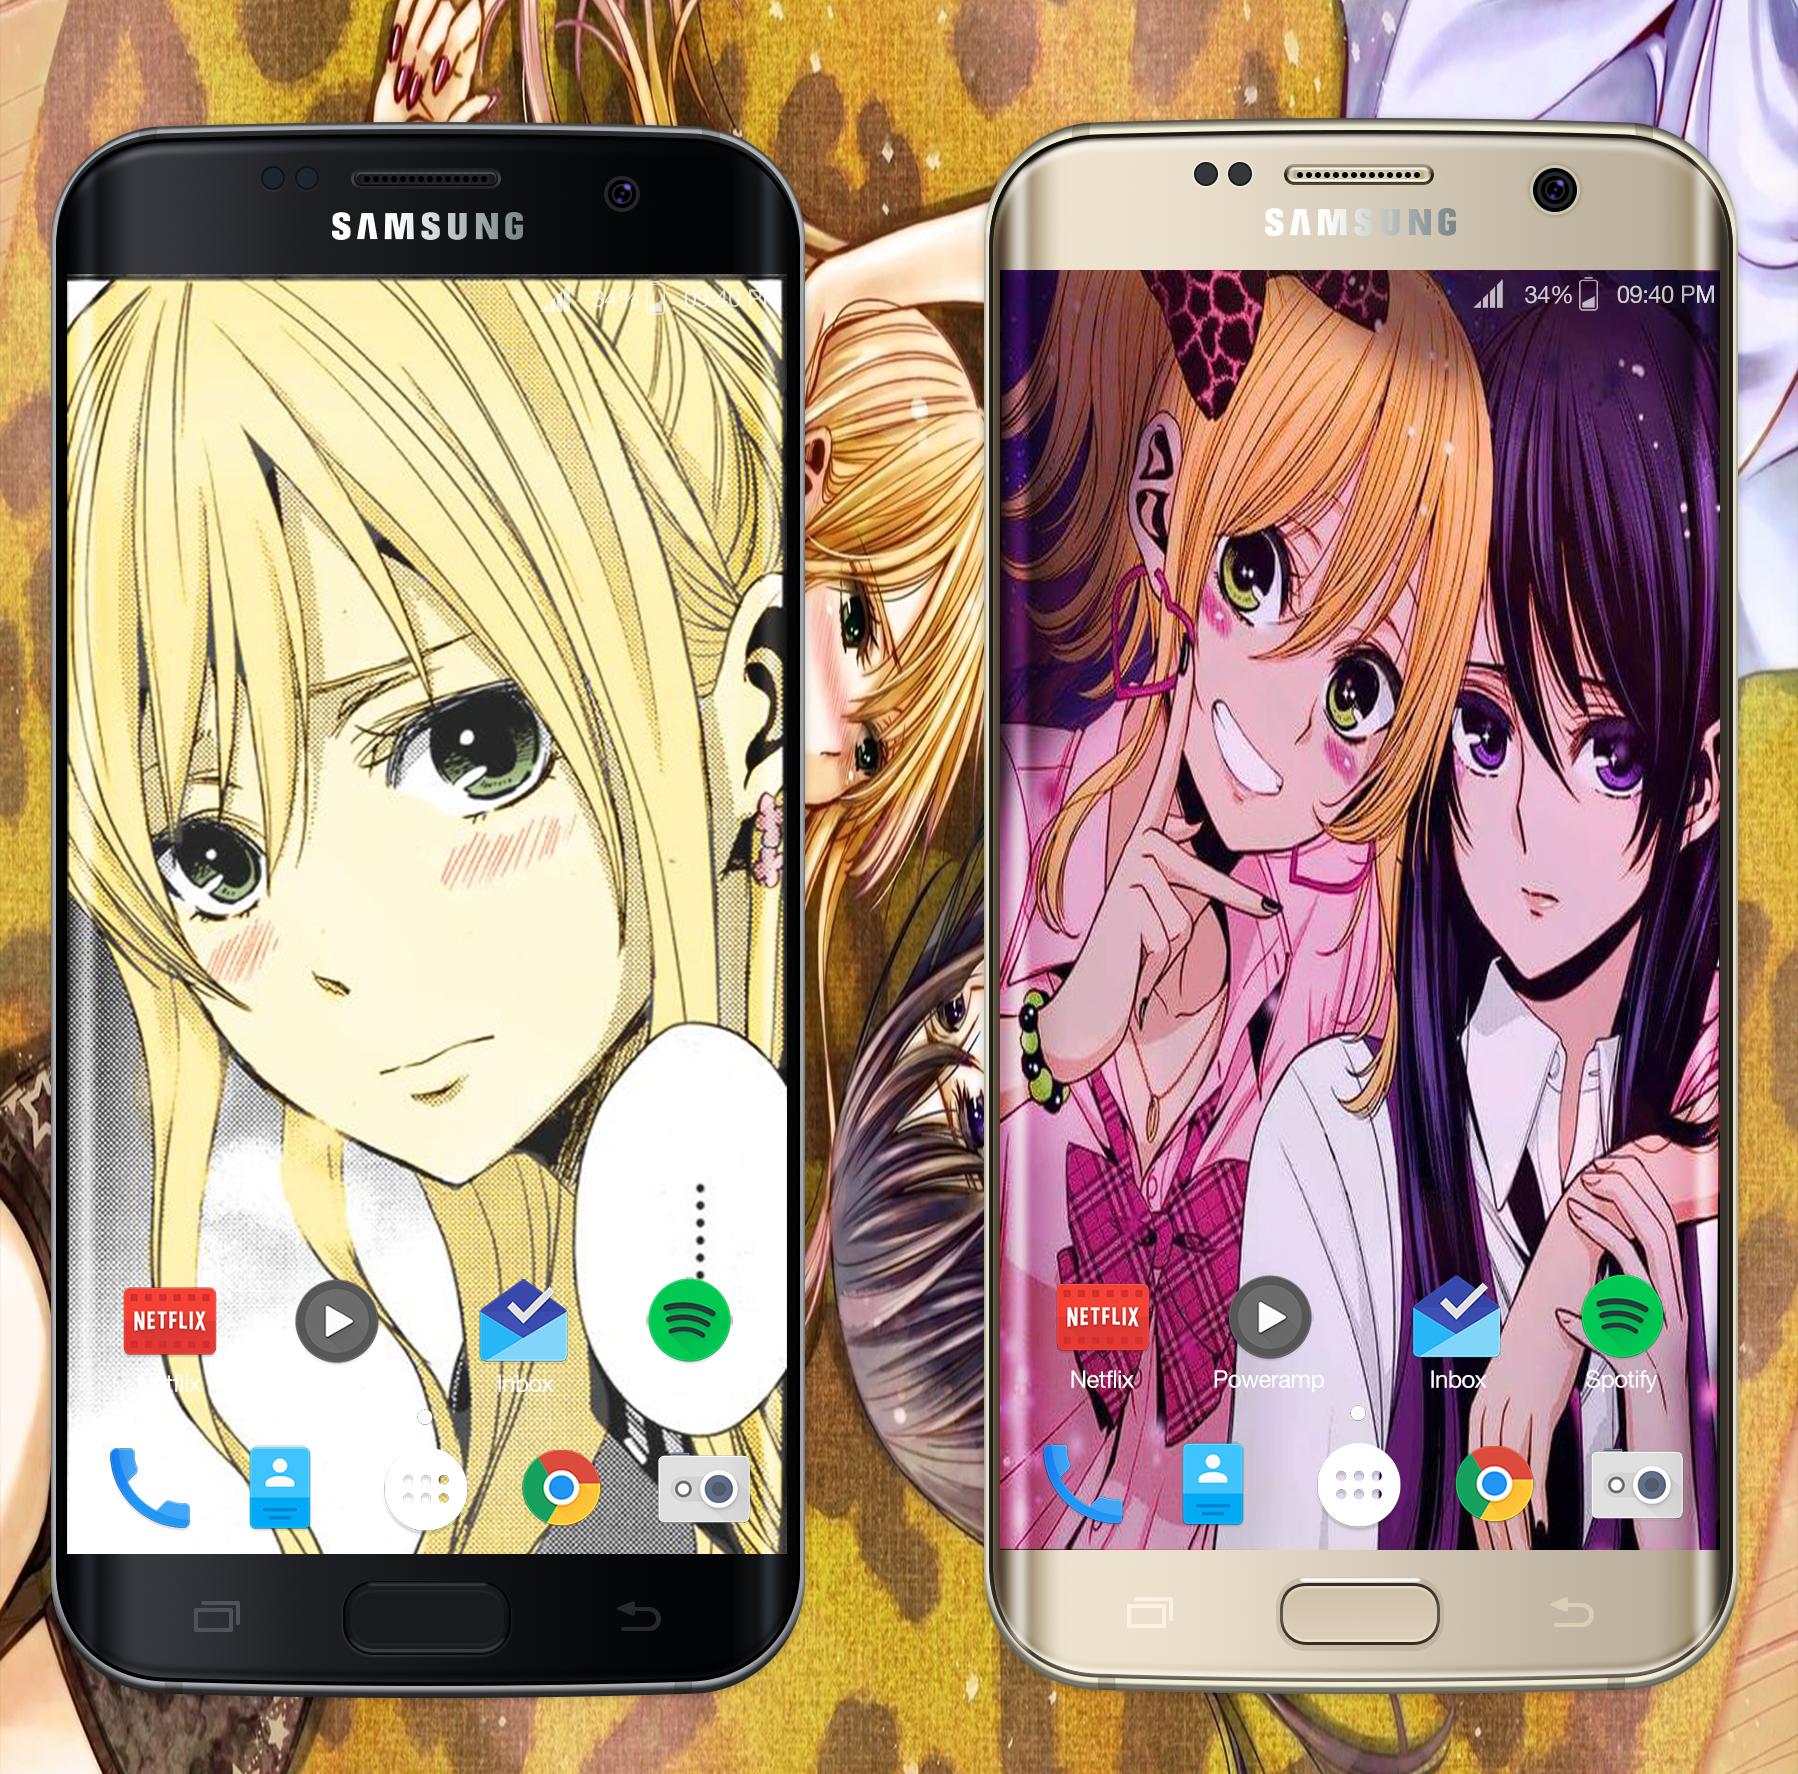 Anime Citrus Wallpapers for Android - APK Download